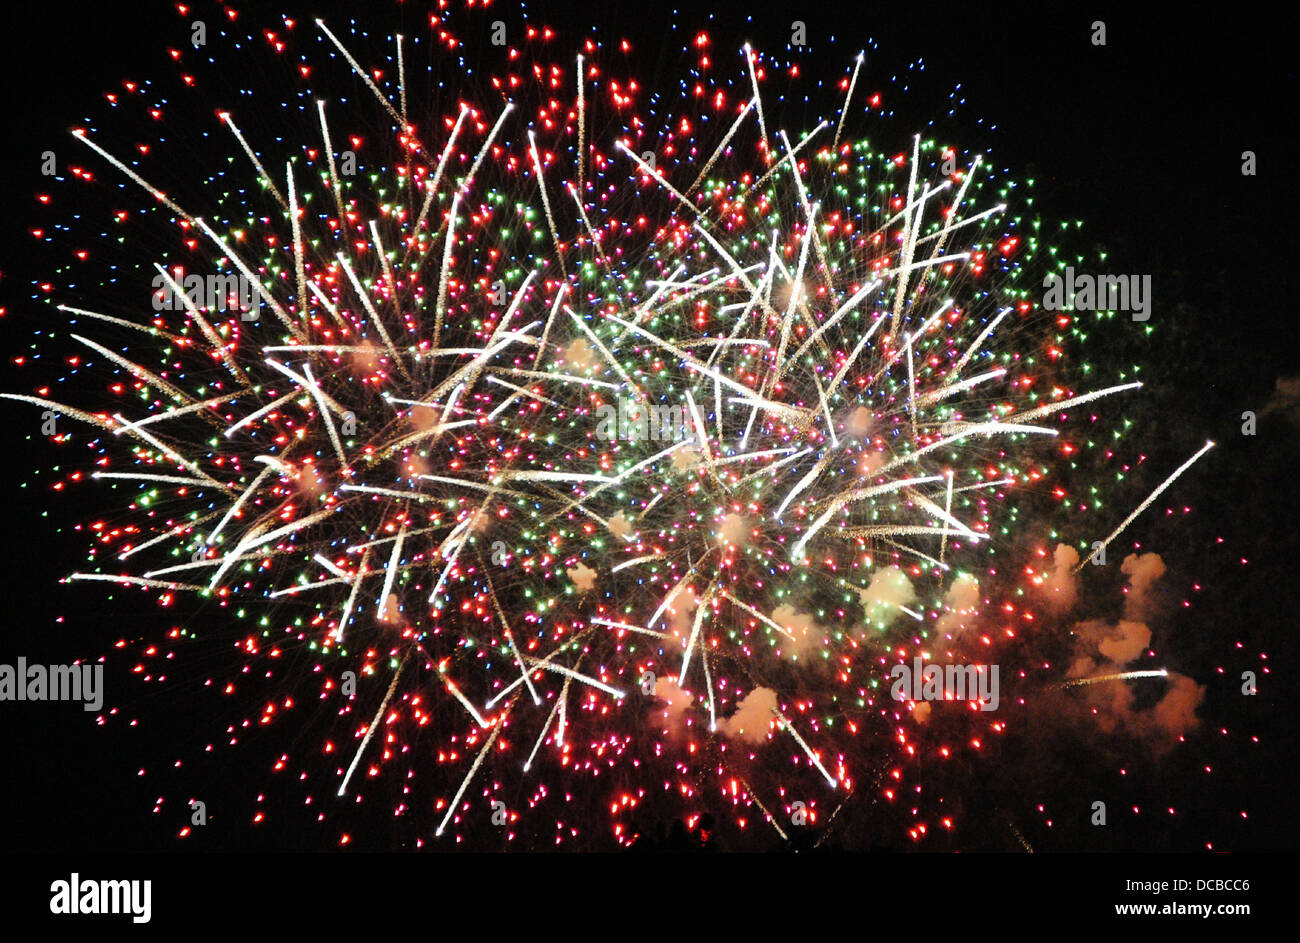 Fireworks,forth of July,Ohio U.S.A.  Remembering  our country's independence. Stock Photo